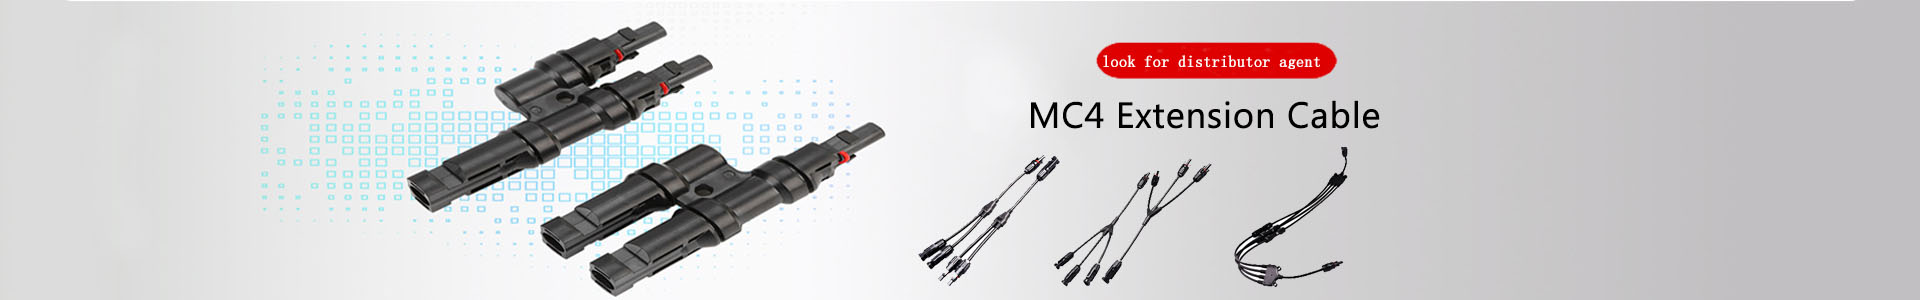 Farm Solar Project-Solar | solar connector,solar branch connector,diode fuse connector,MC4 extnsion cable,H1Z2Z2 solar cable, UL4703 solar cable | Leading manufacturer and supplier of solar pv cables and connectors